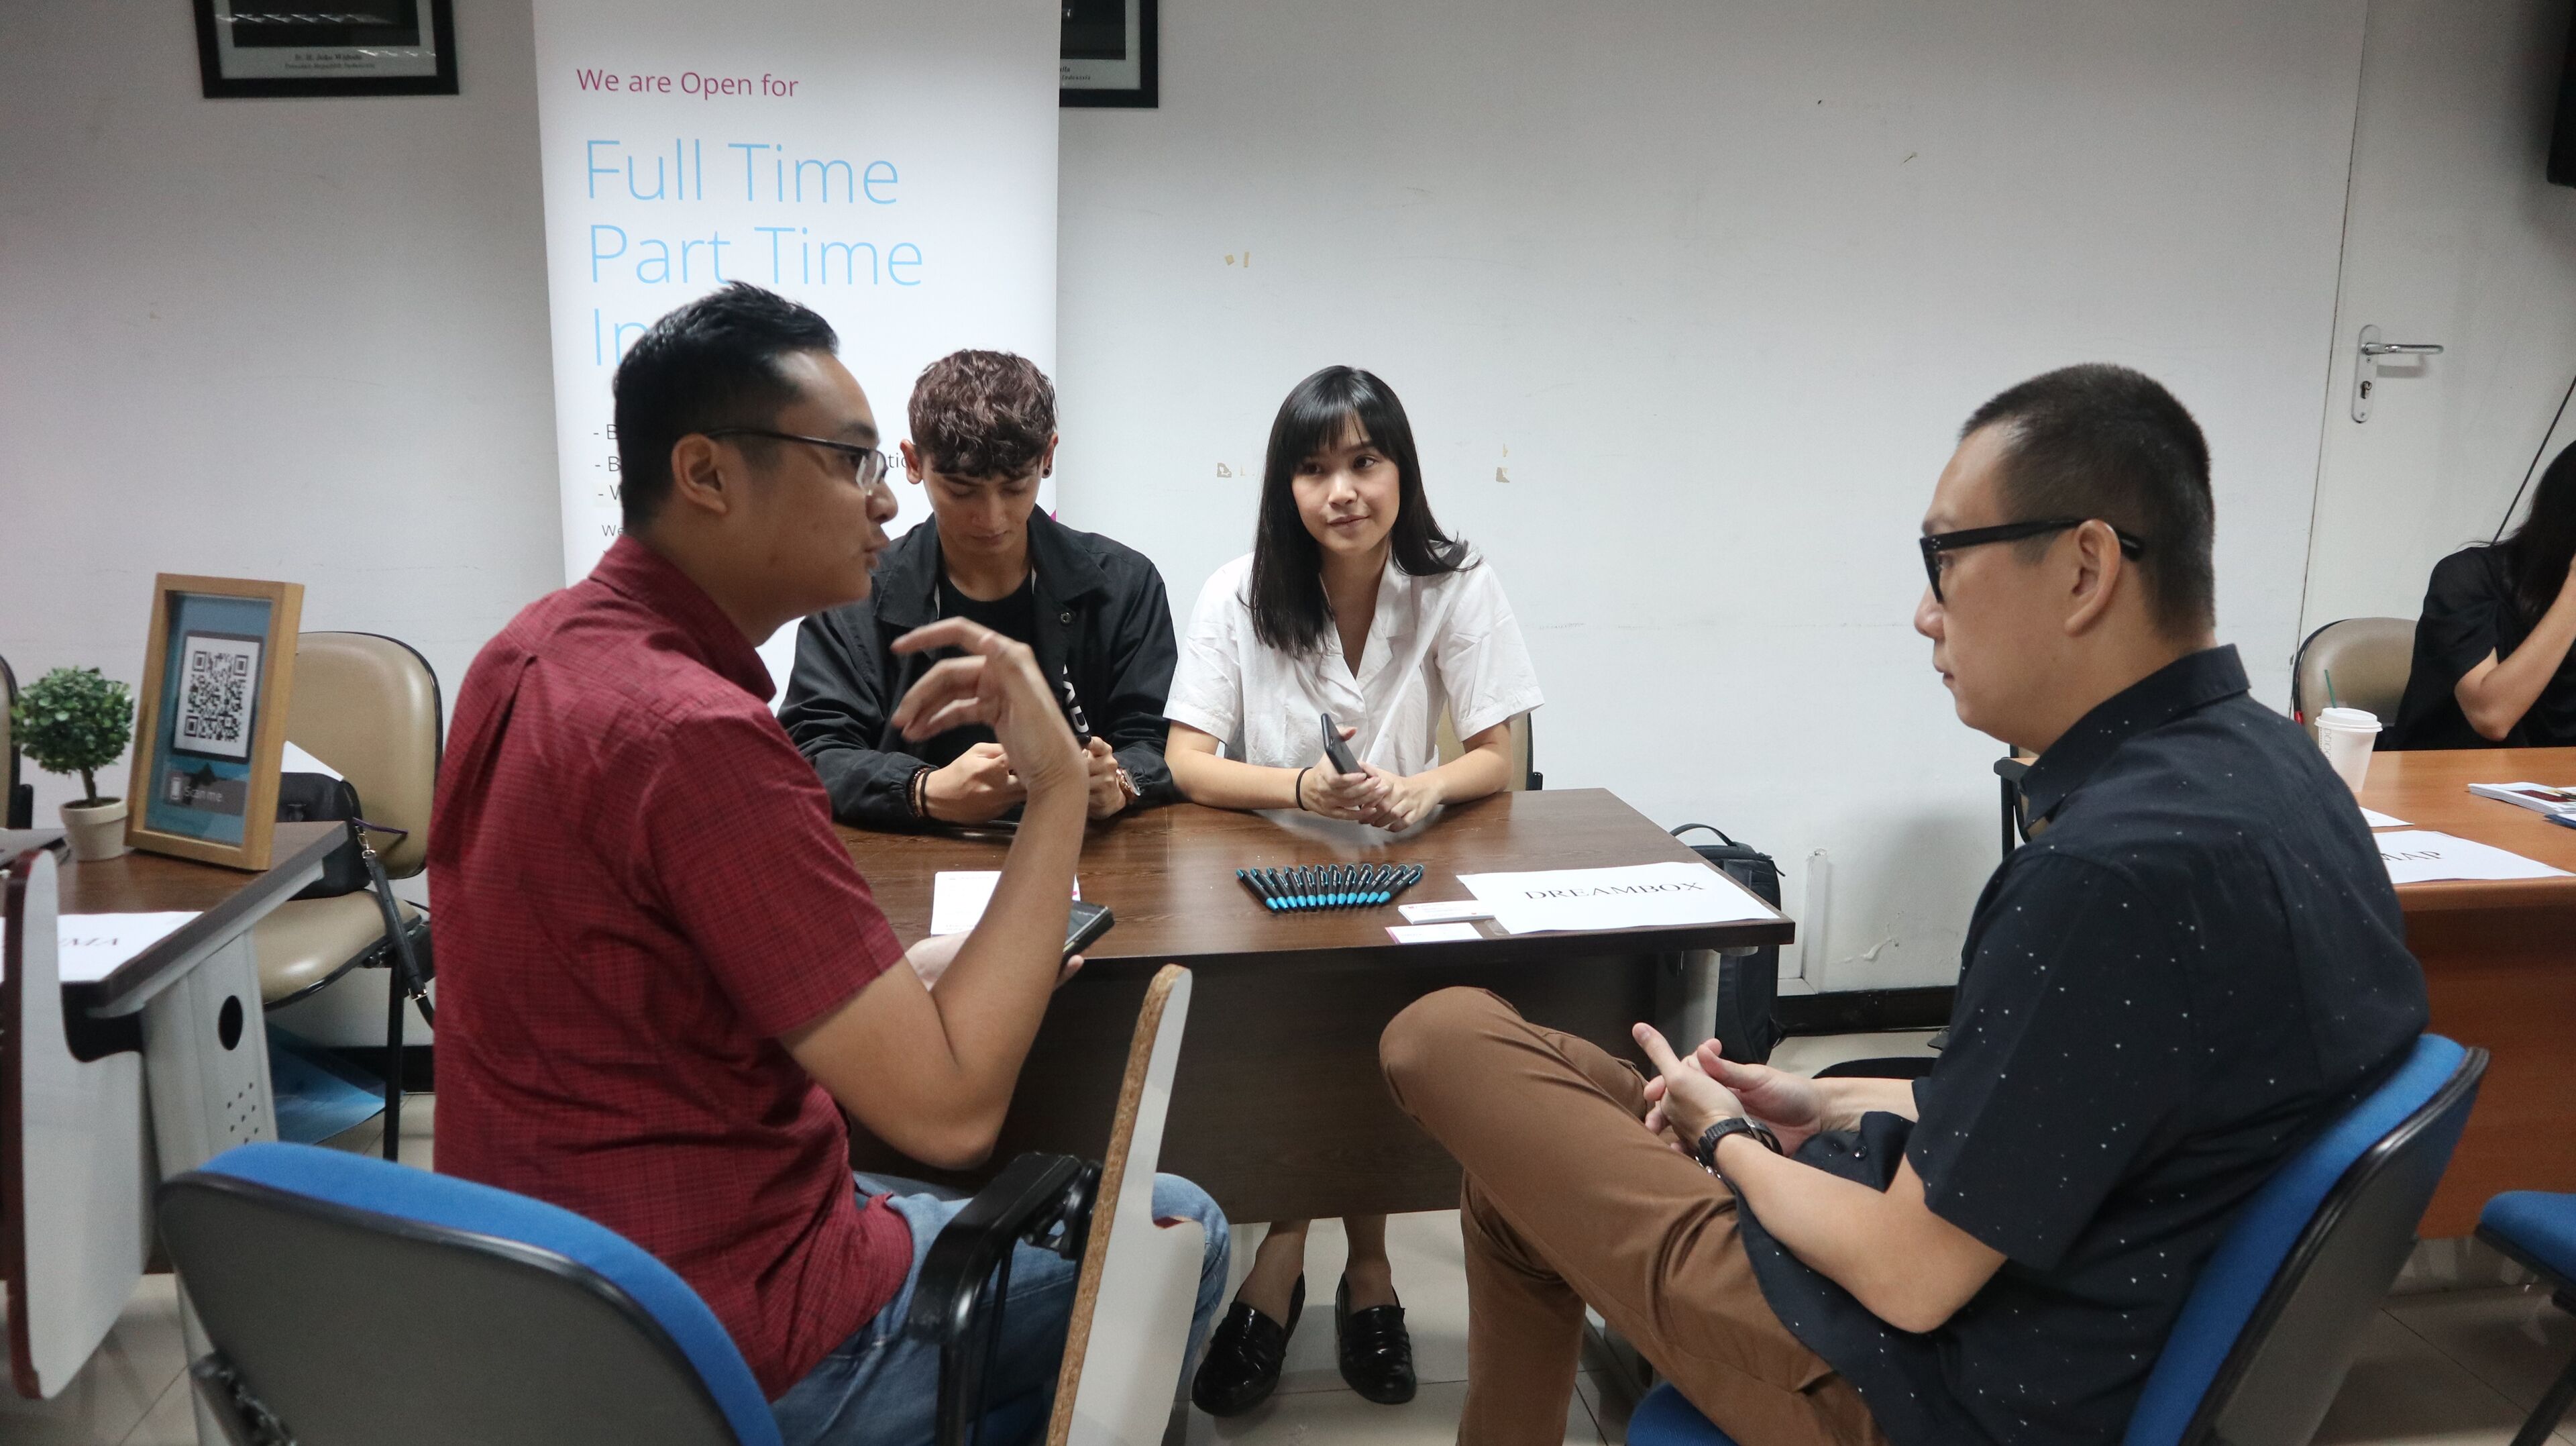 Four professionals engaged in a discussion at a table with pens and documents, under a sign that reads "Full Time Part Time Intern".